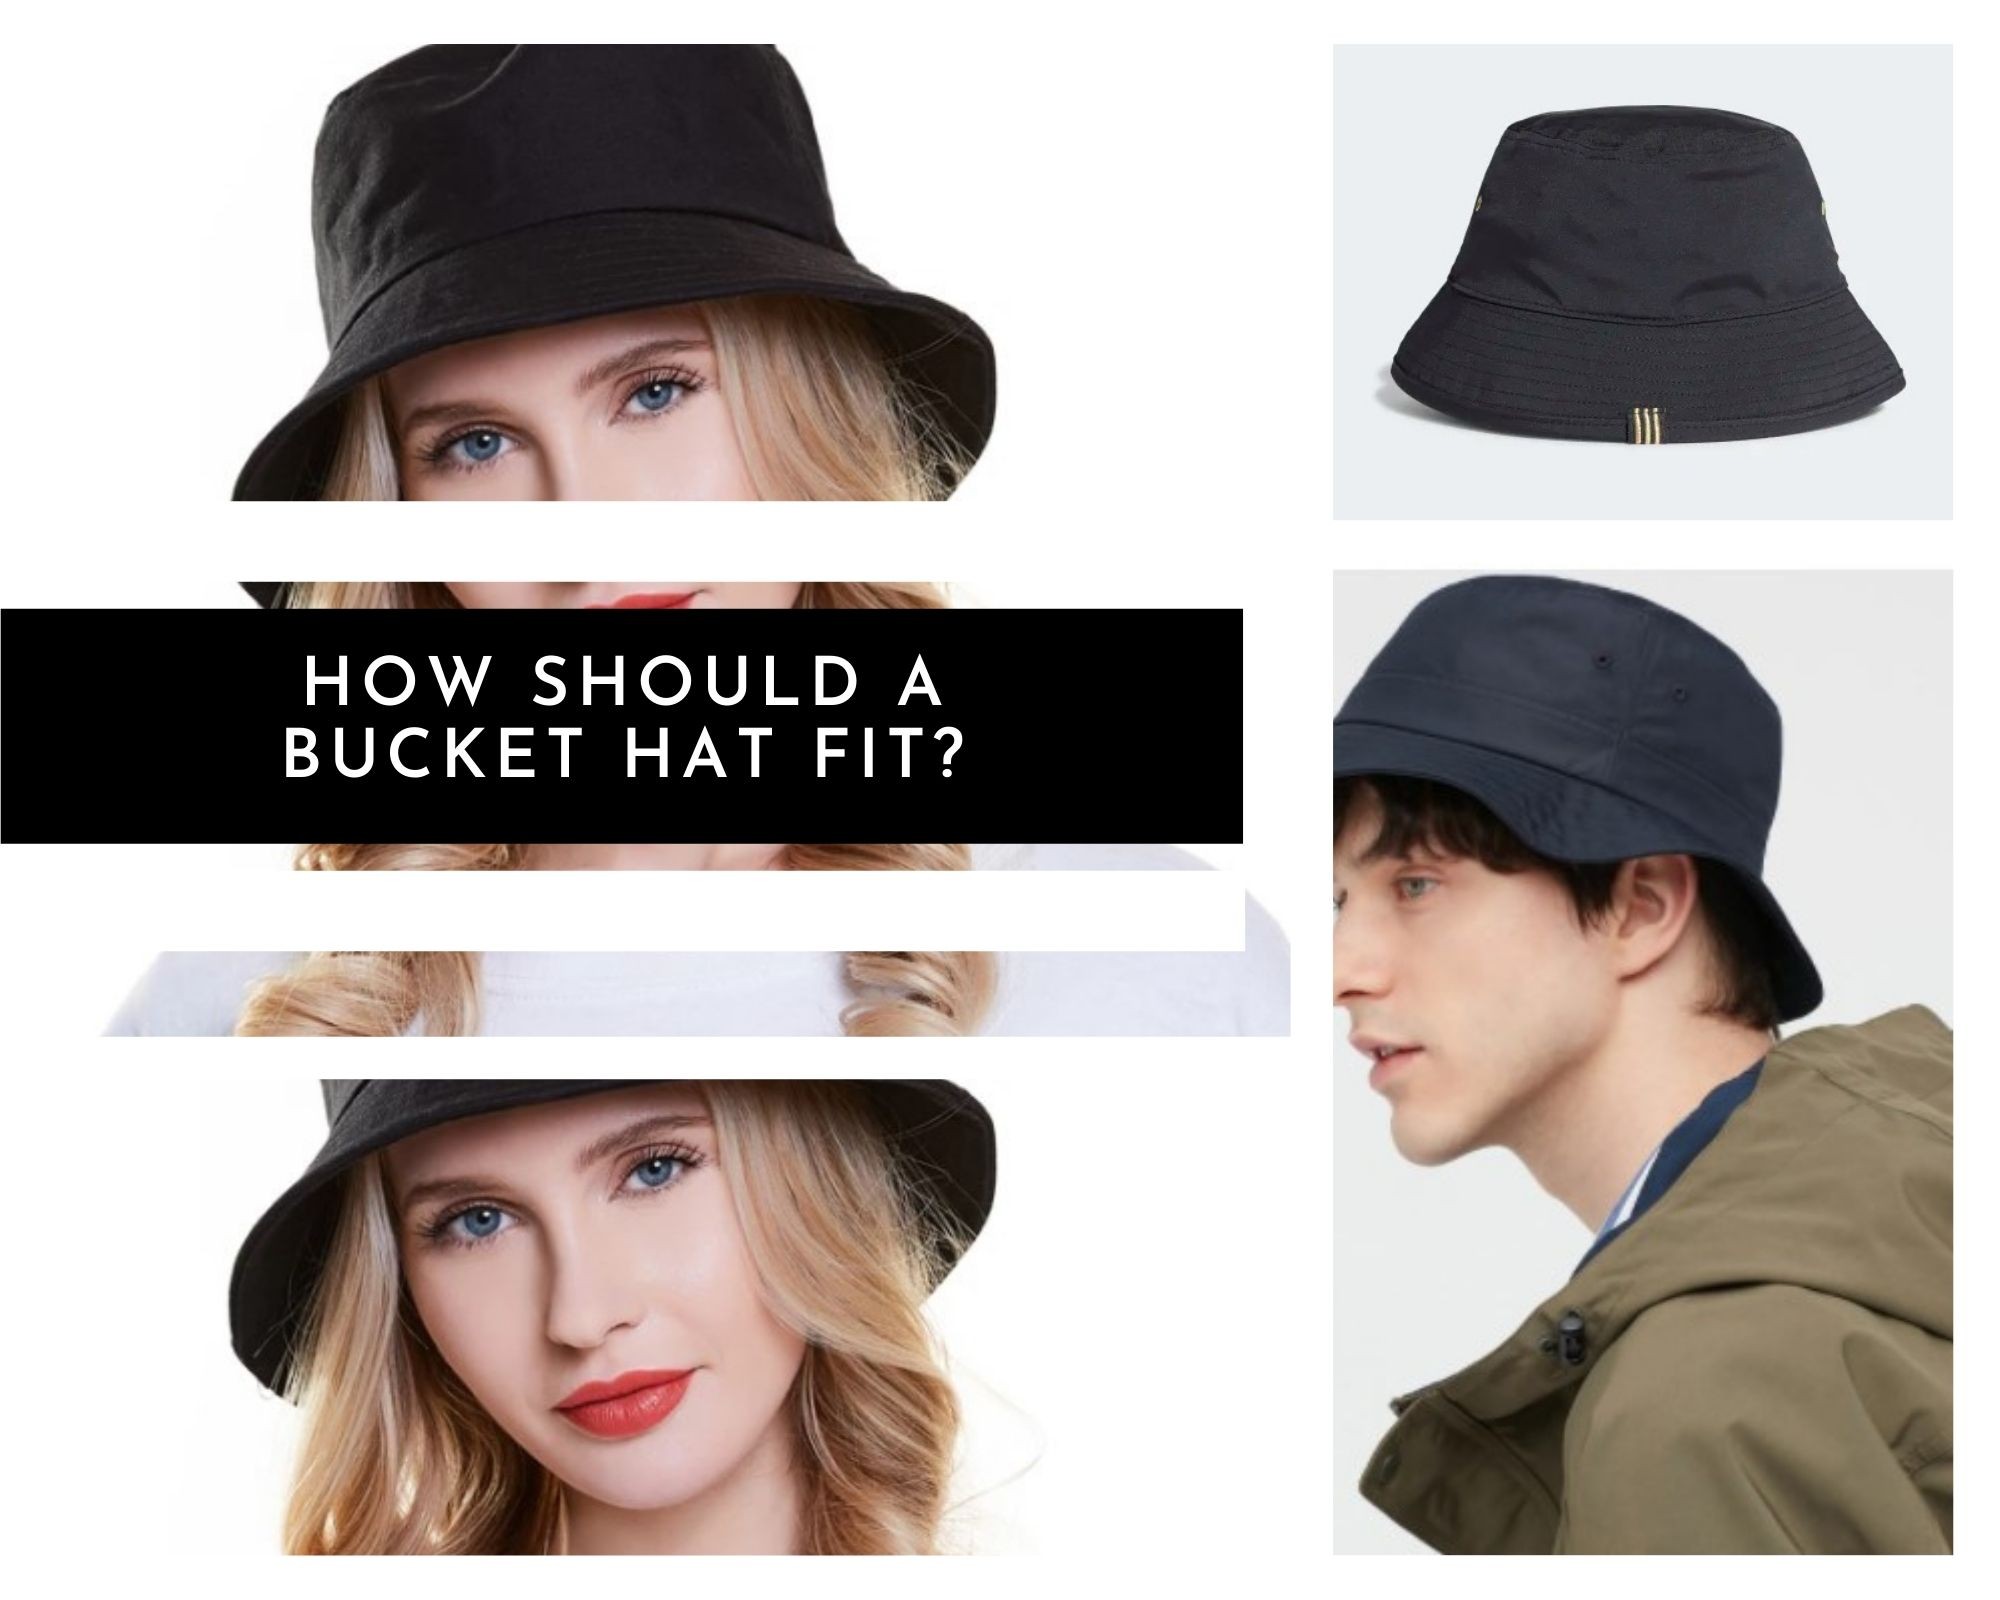 How should a bucket hat fit